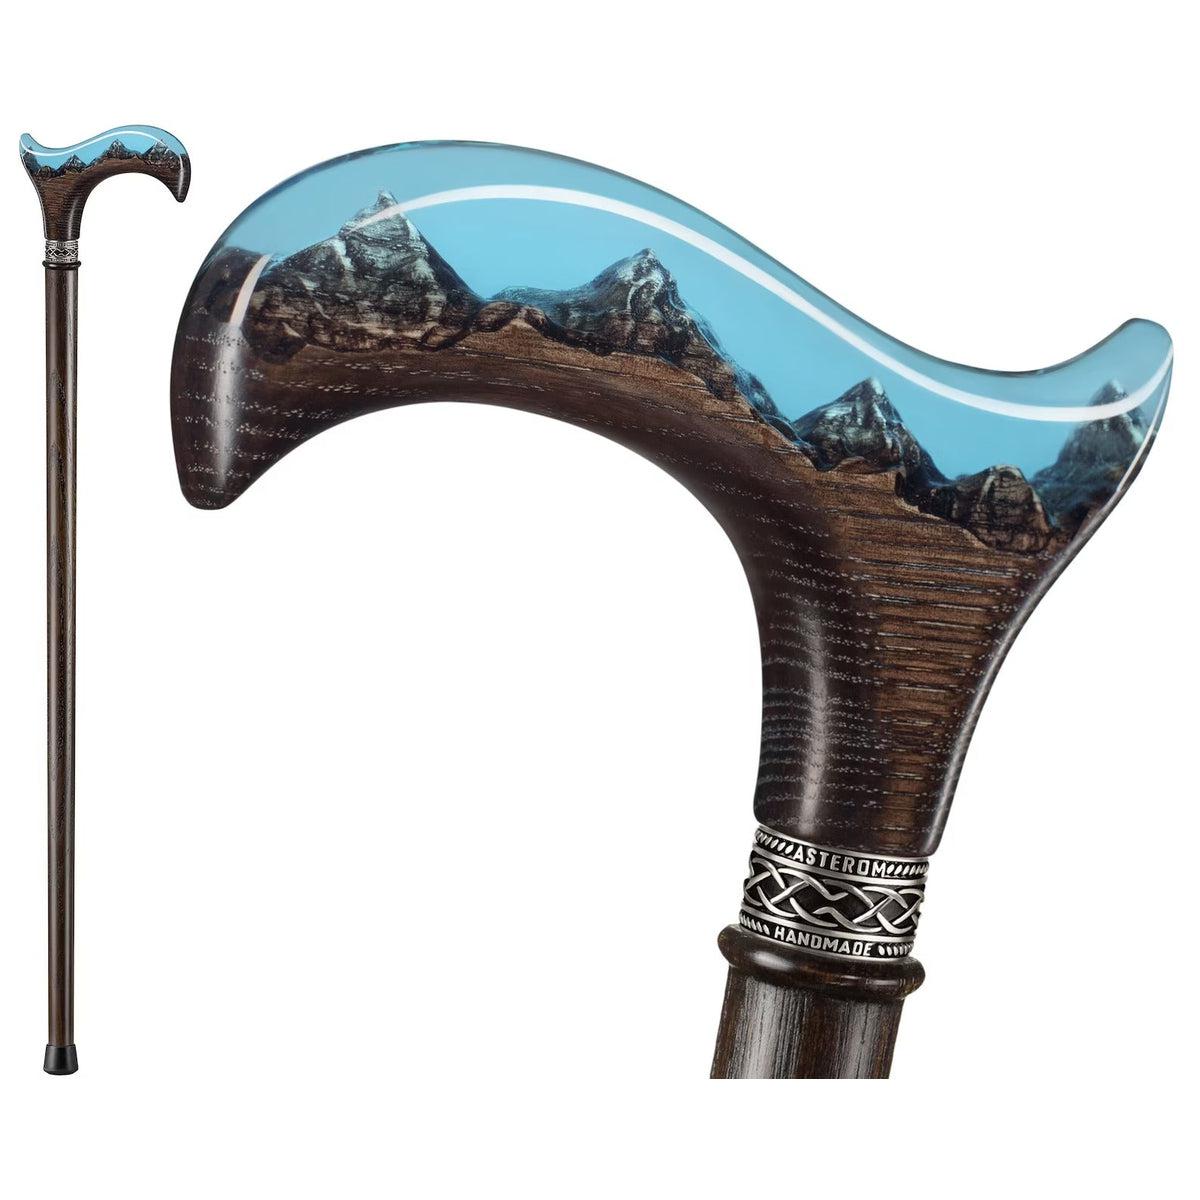 Unique Epoxy Resin Mountain Inlay Wooden Walking Cane or Stick - Derby